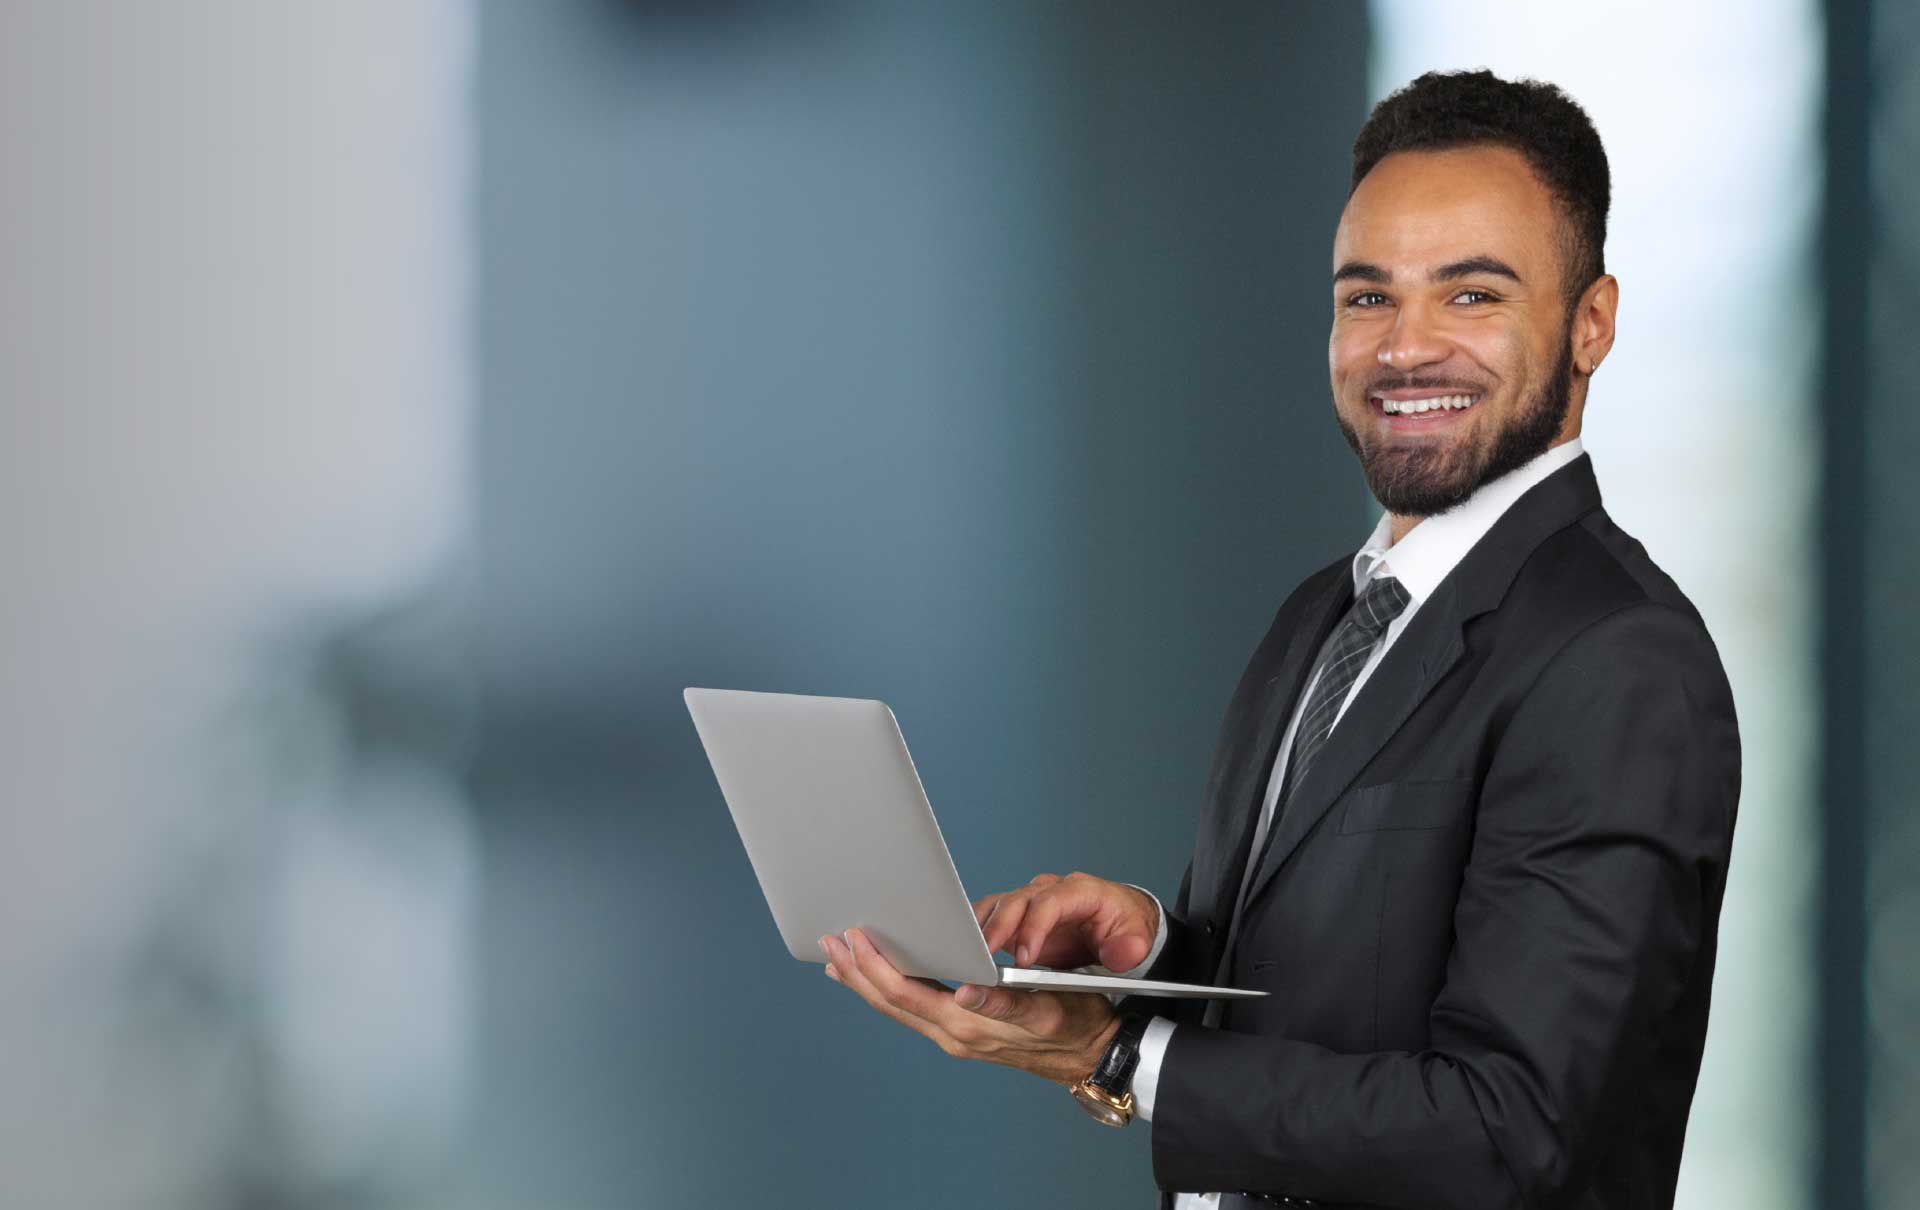 Professional business executive wearing a black suit, working on his laptop and smiling.